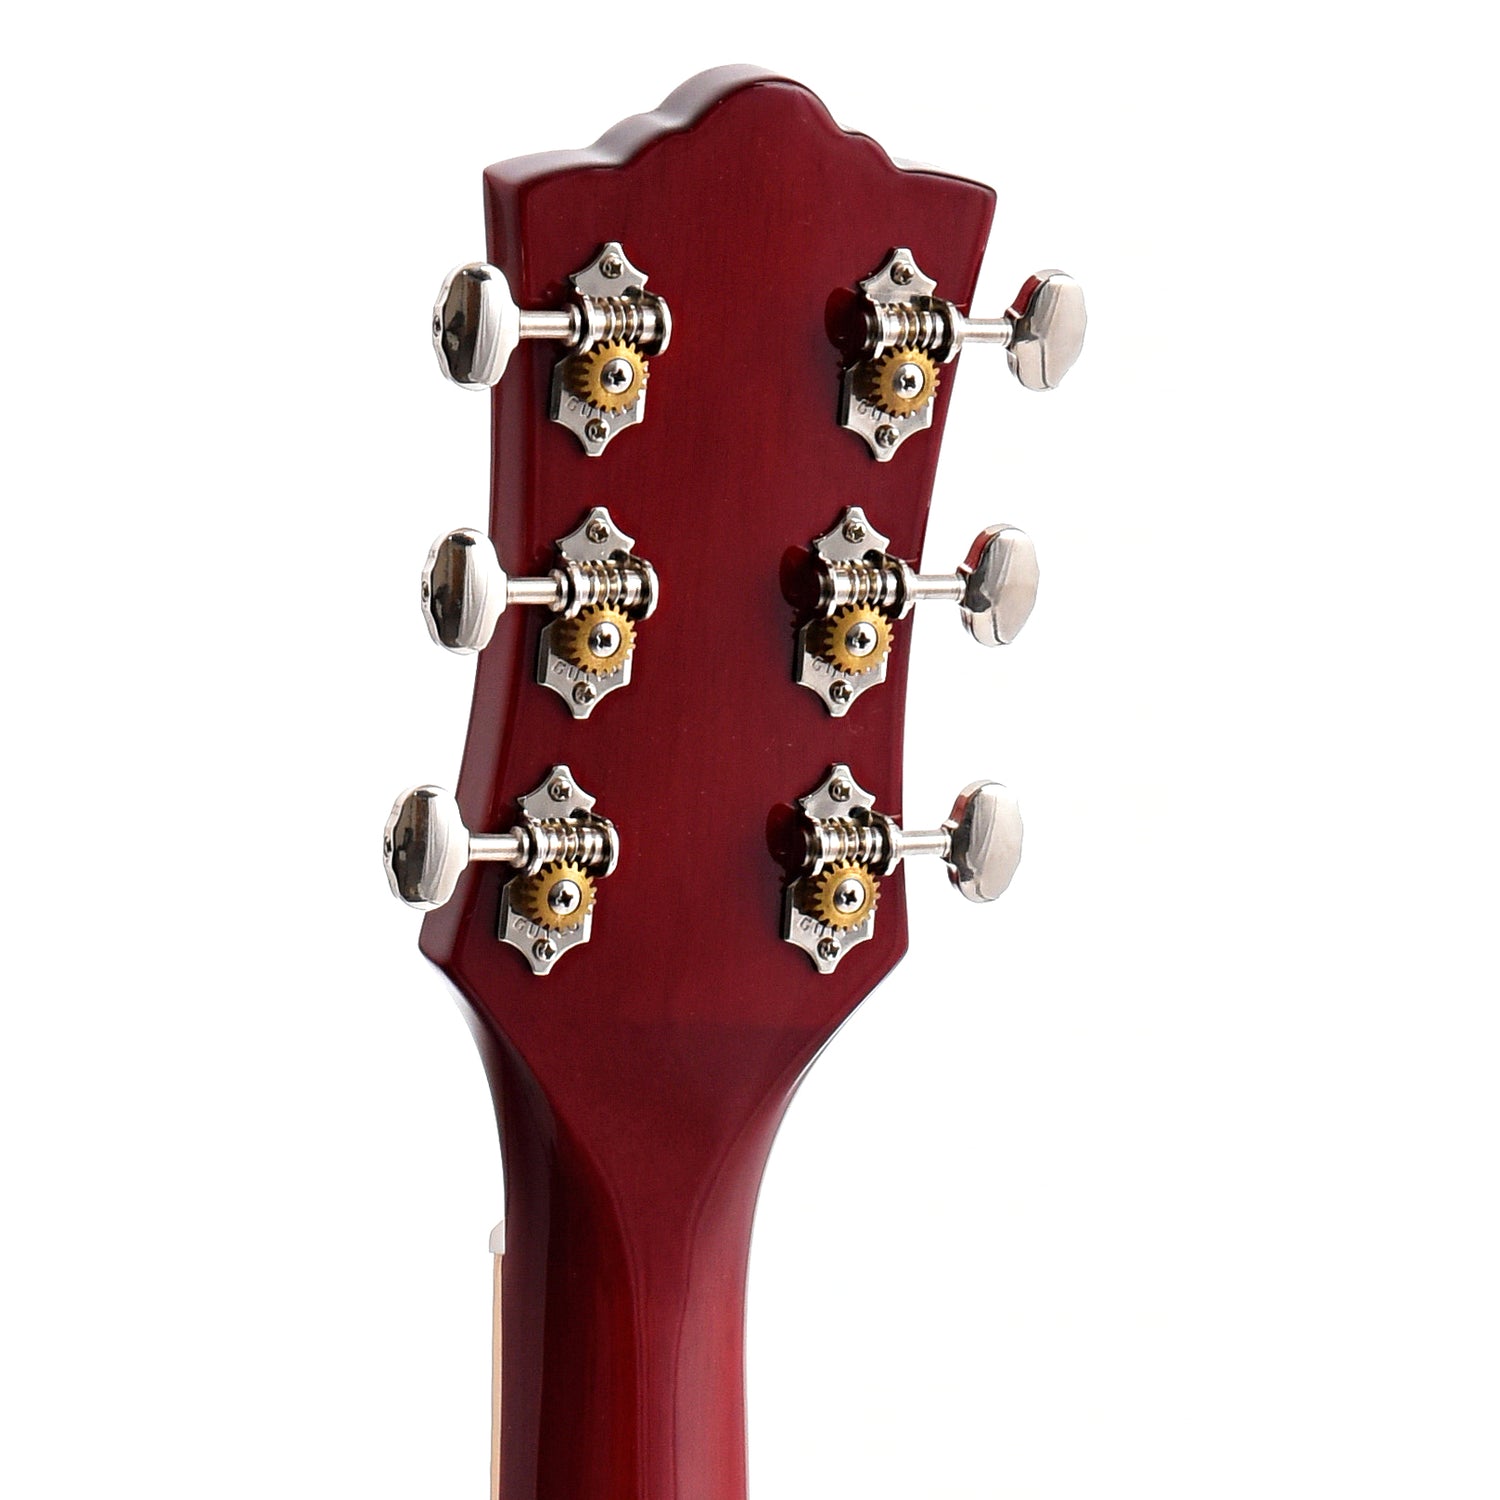 back headstock of Guild Starfire I Double Cutaway Semi-Hollow Body Guitar, Cherry Red